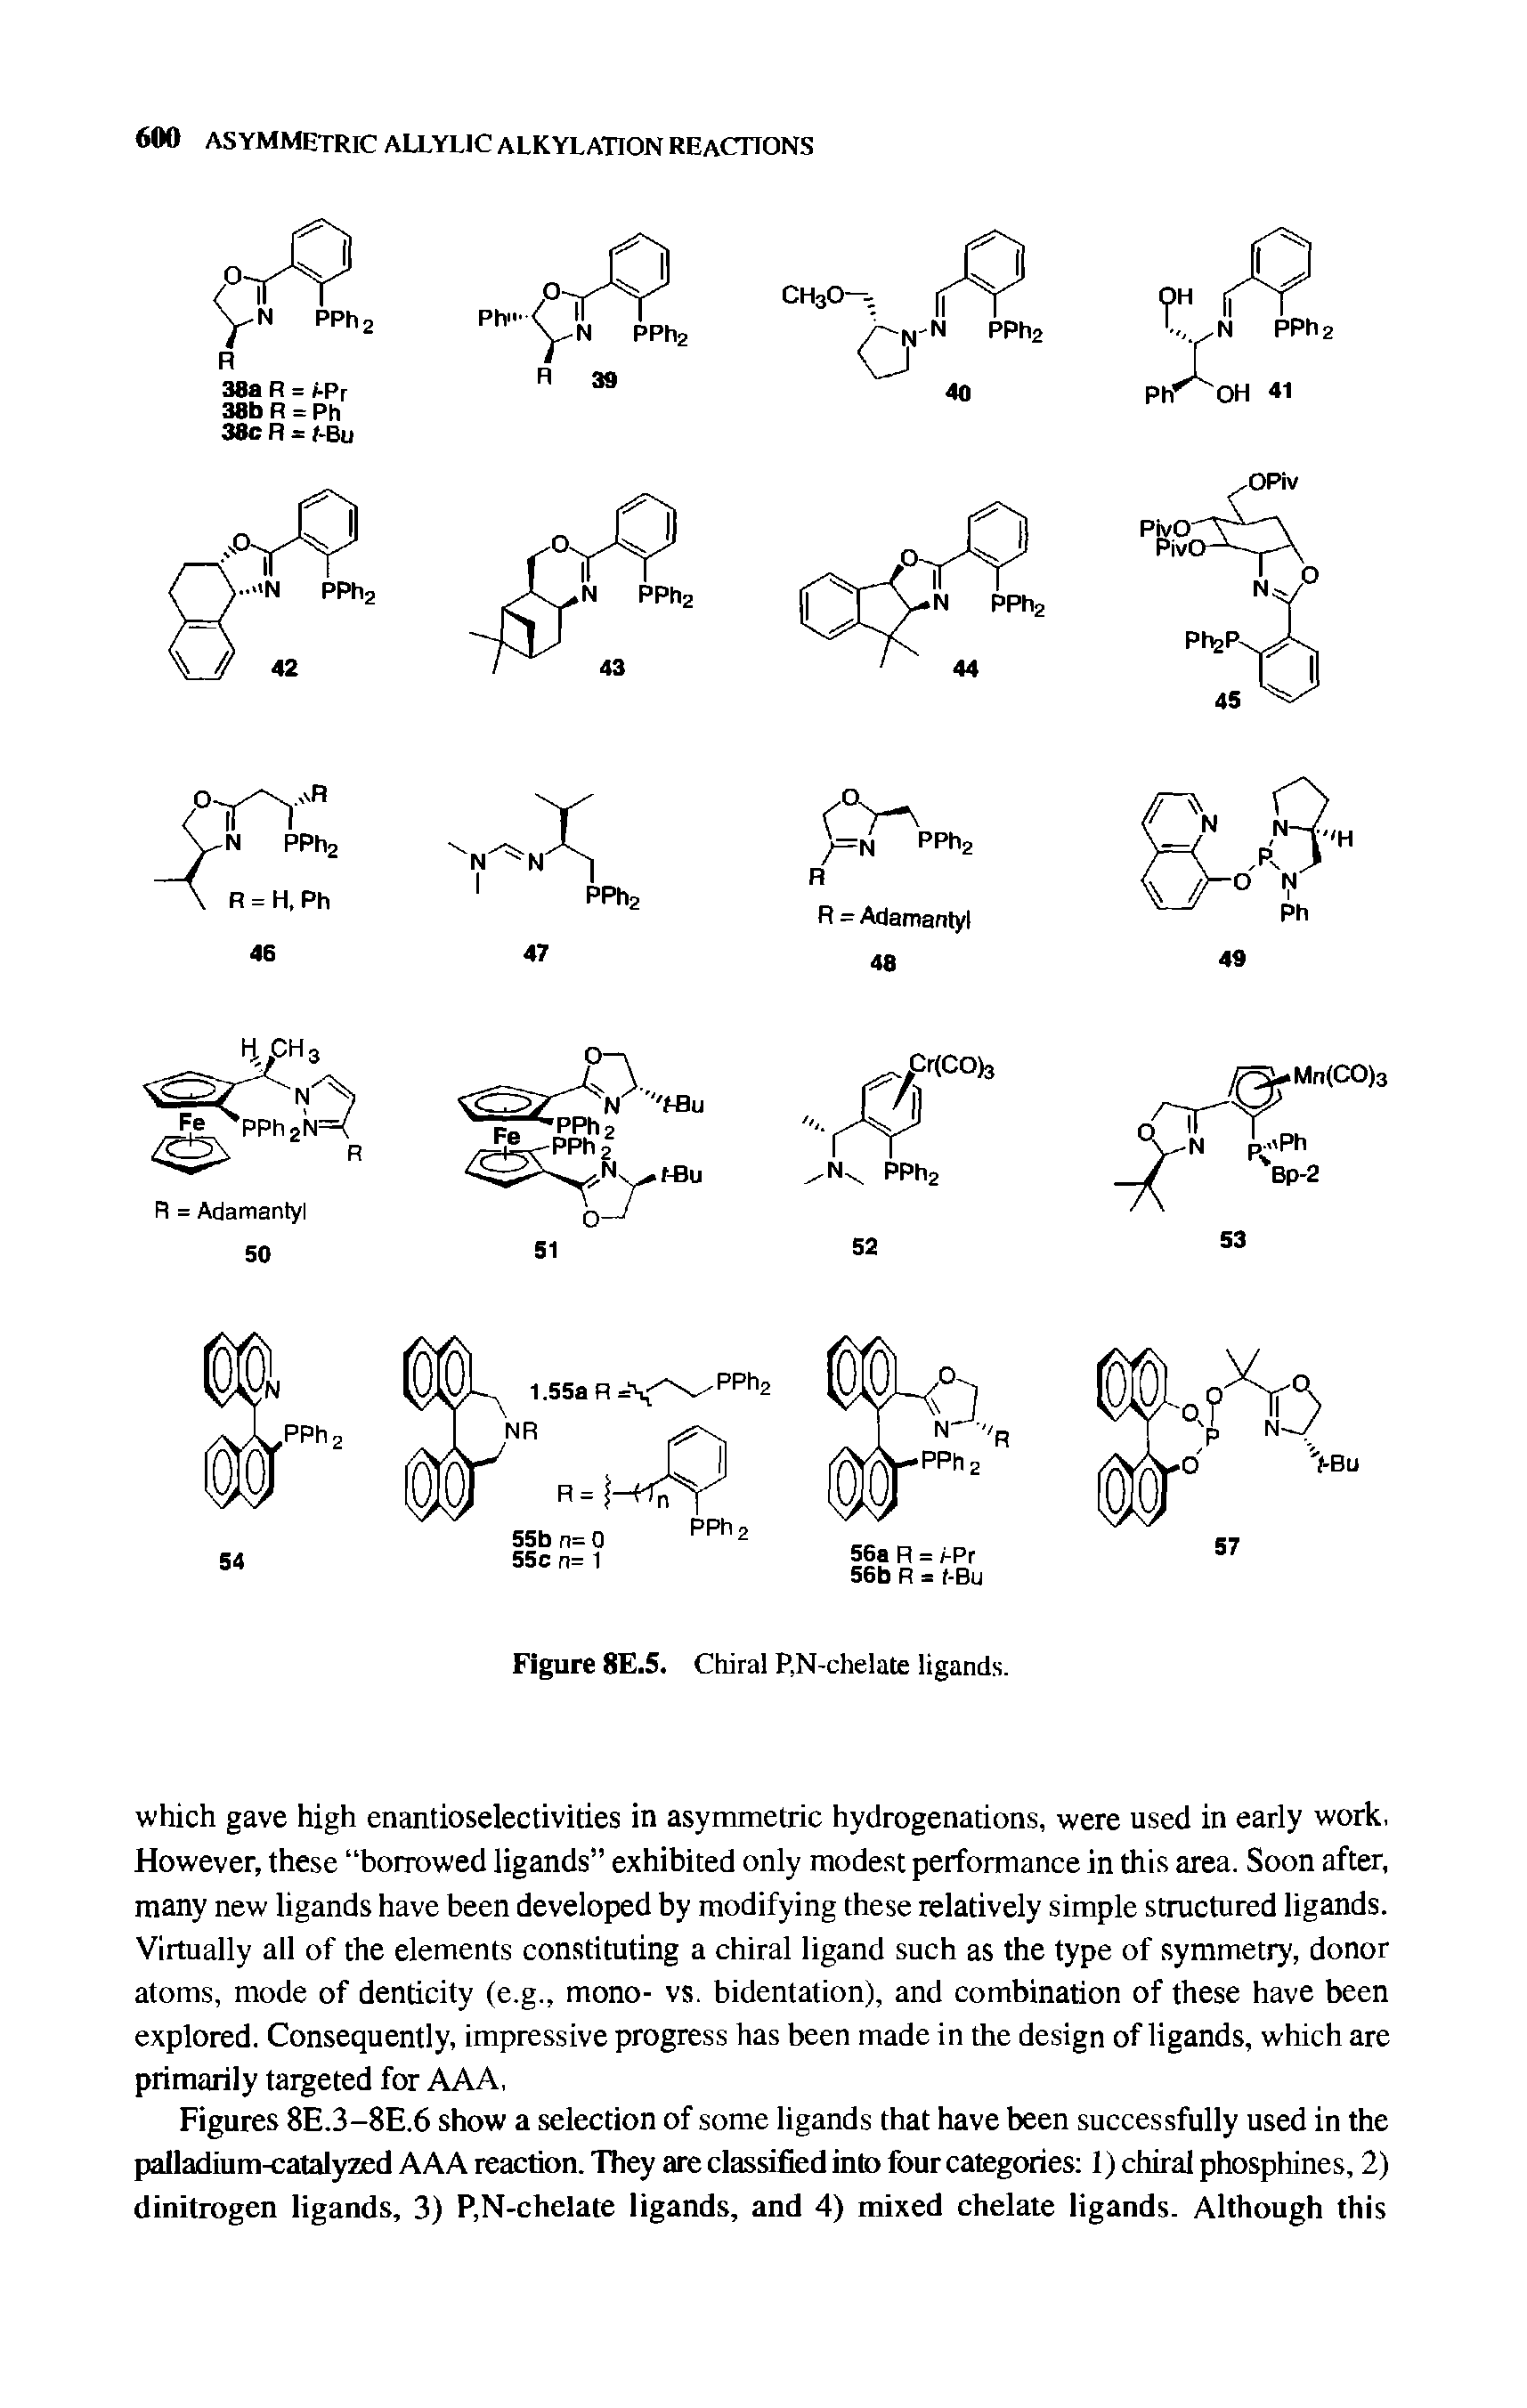 Figures 8E.3-8E.6 show a selection of some ligands that have been successfully used in the palladium-catalyzed AAA reaction. They are classified into four categories 1) chiral phosphines, 2) dinitrogen ligands, 3) P,N-chelate ligands, and 4) mixed chelate ligands. Although this...